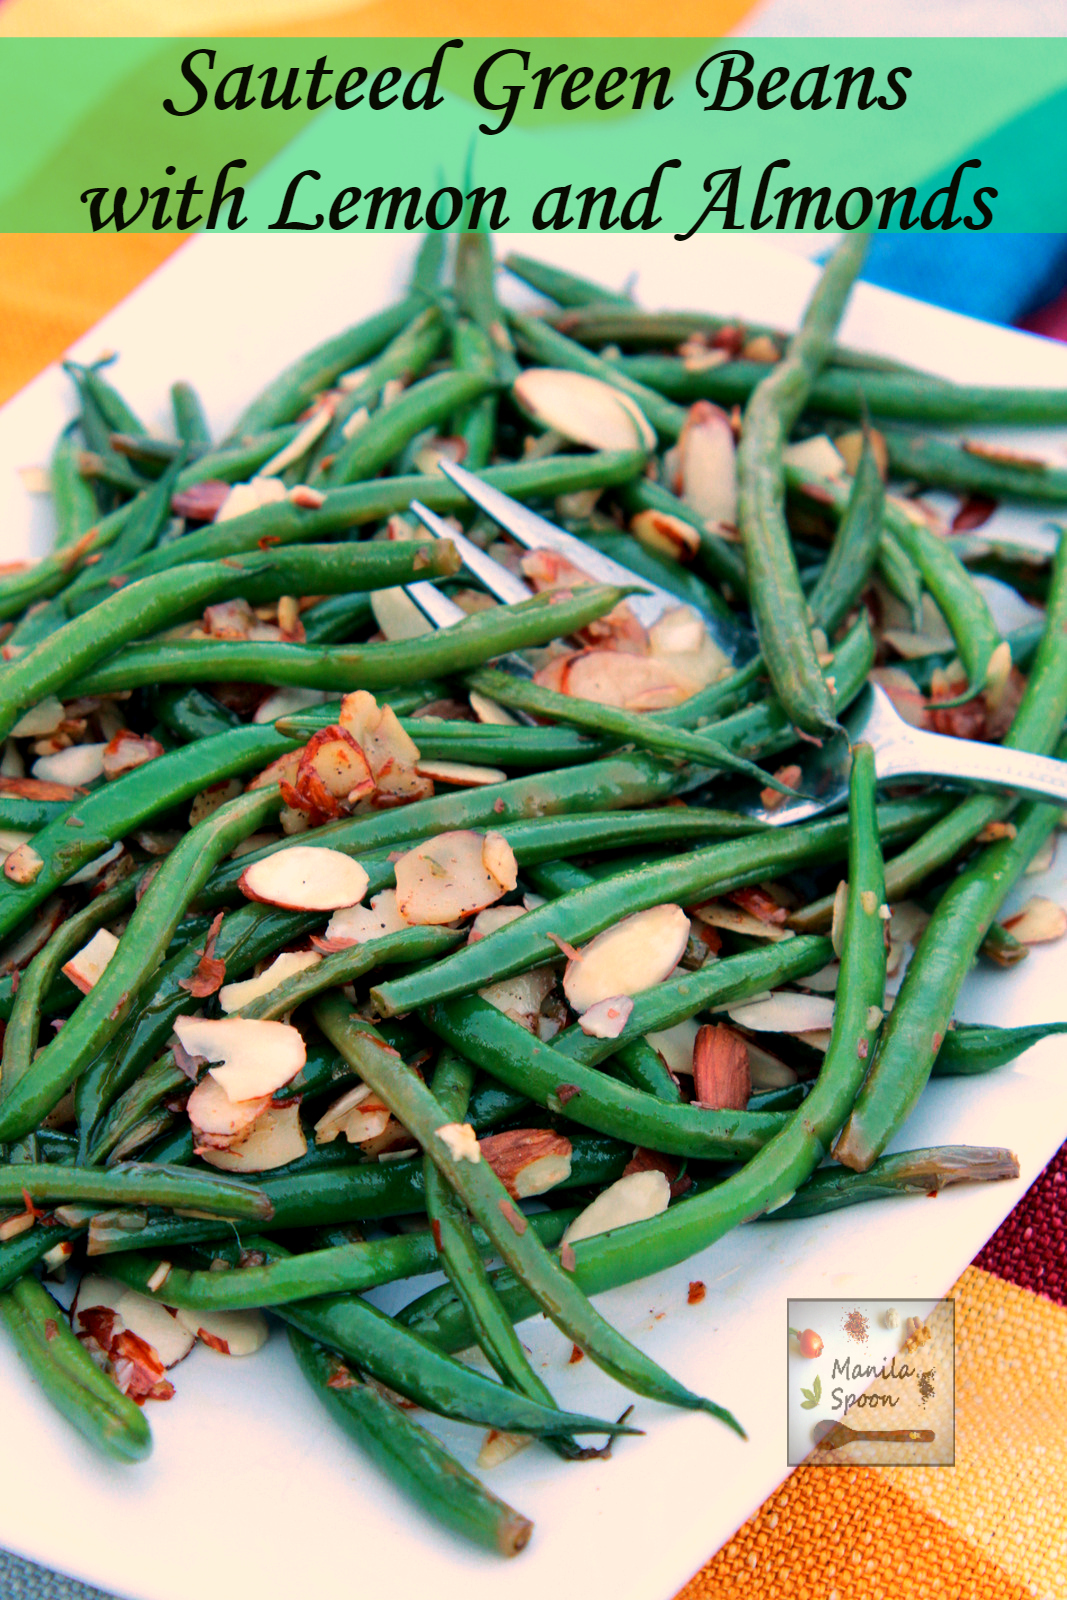 Just 5 minutes to make this tasty side dish full of buttery, lemony goodness and extra crunch from Almonds! Sautéed Green Beans with Lemon and Almonds